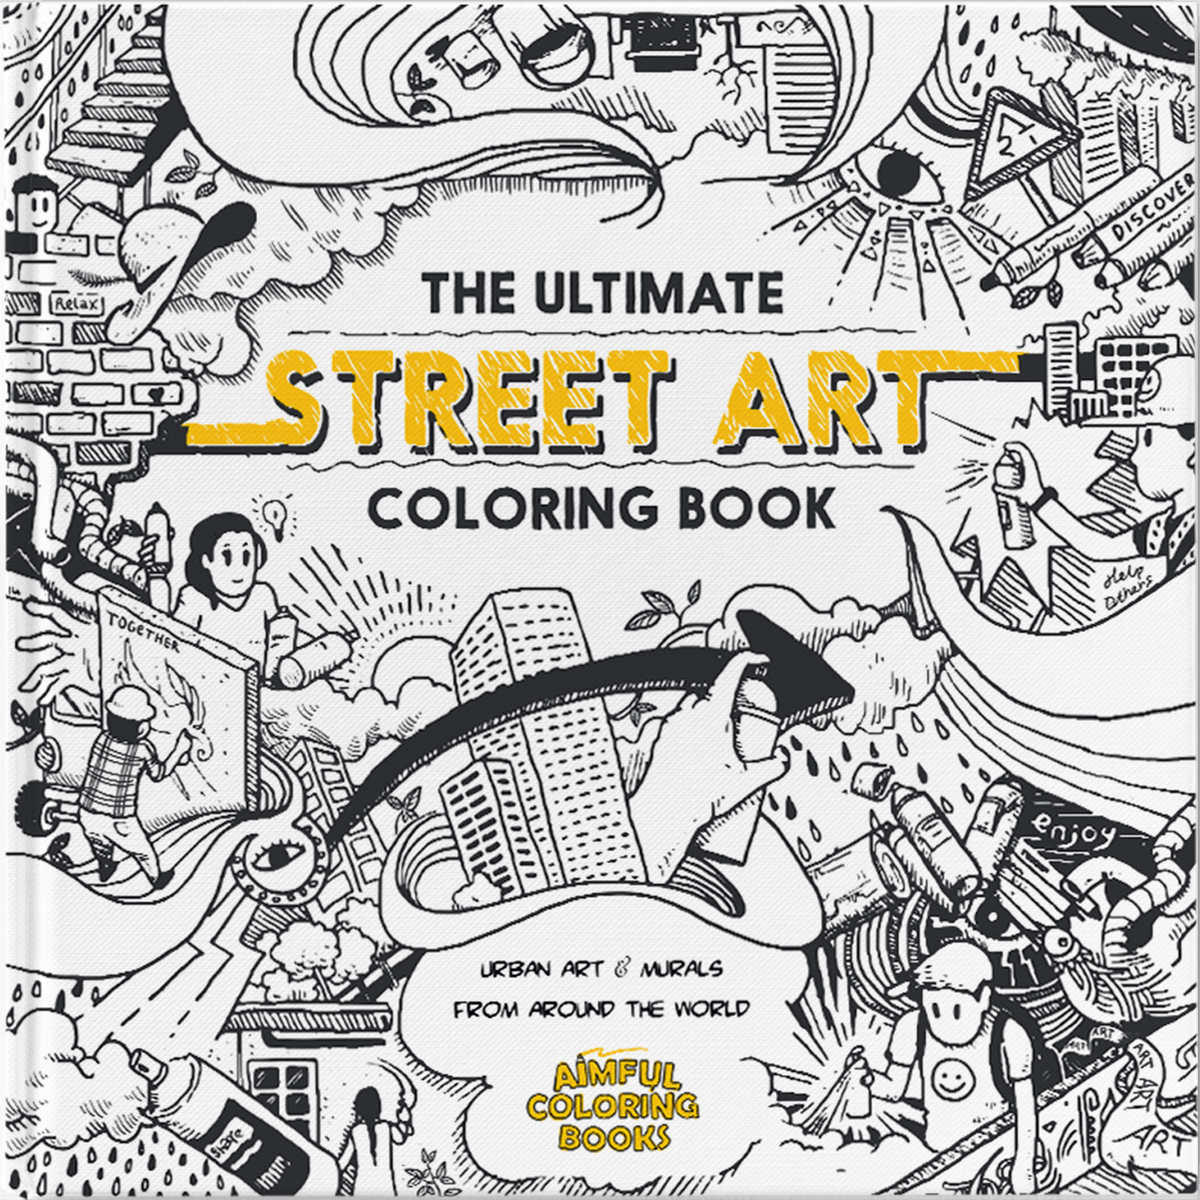 The Ultimate Street Art Coloring Book Collector's Edition